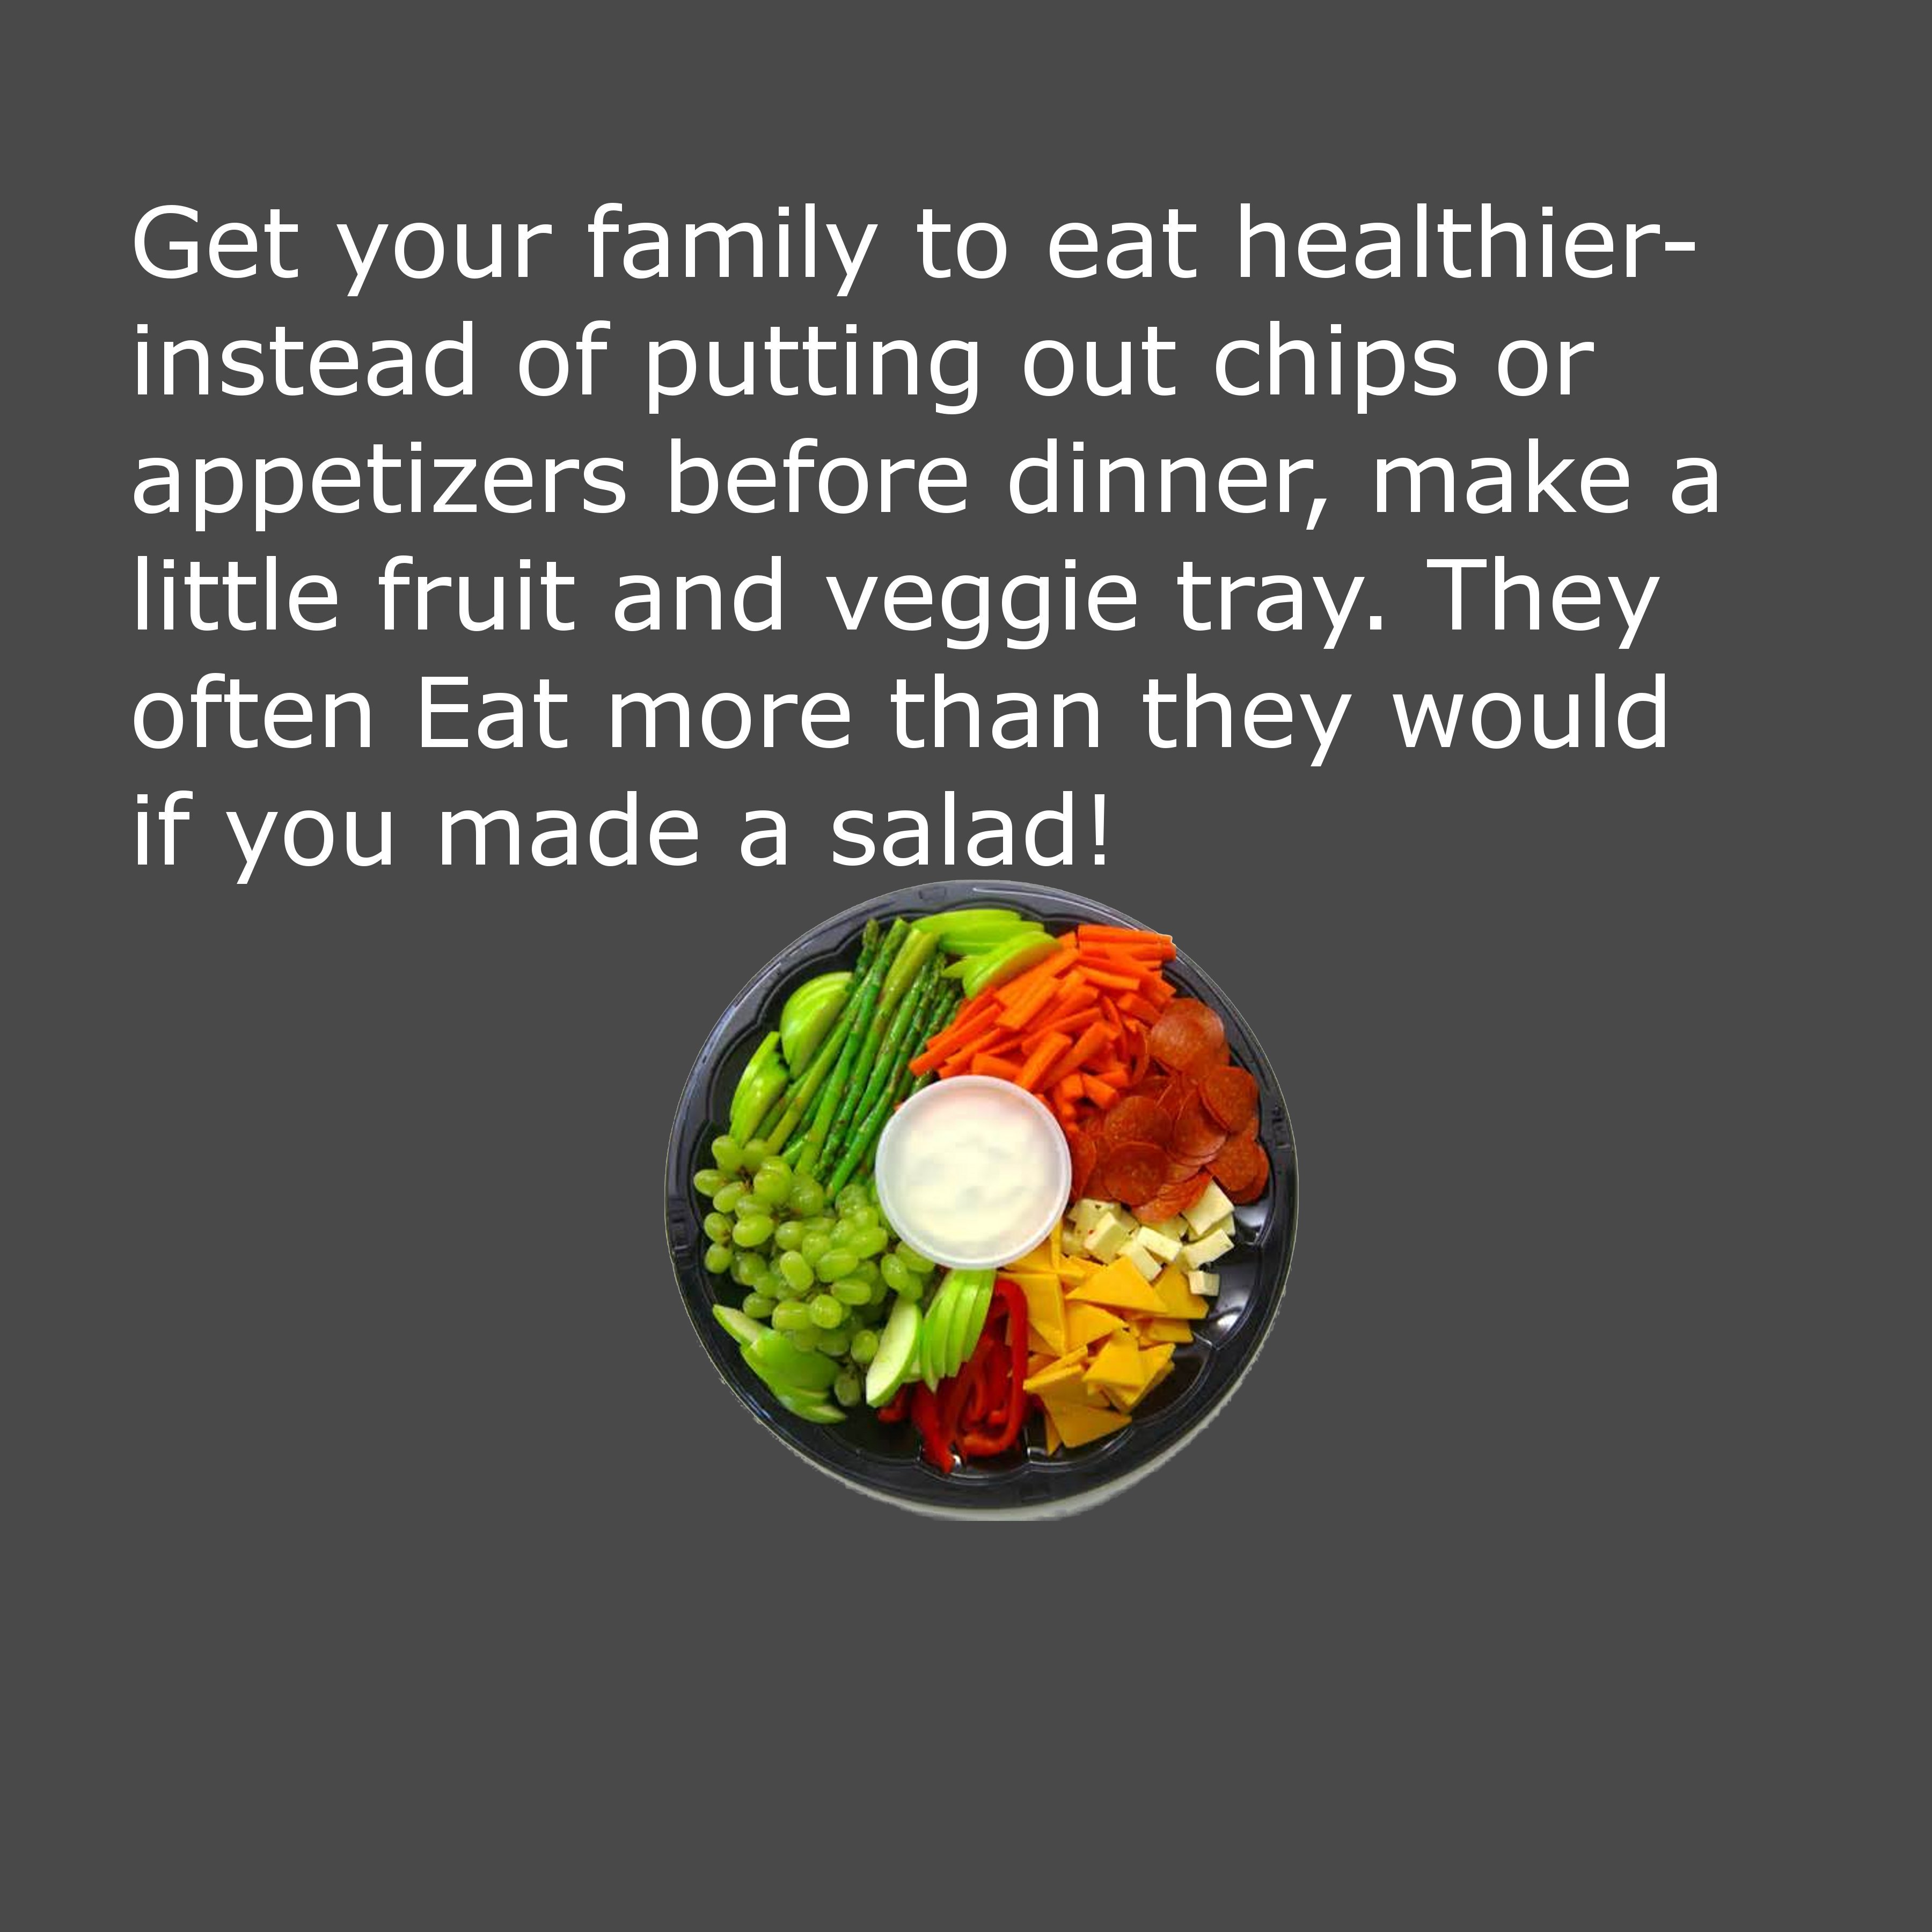 dish - Get your family to eat healthier instead of putting out chips or appetizers before dinner, make a little fruit and veggie tray. They often Eat more than they would if you made a salad!